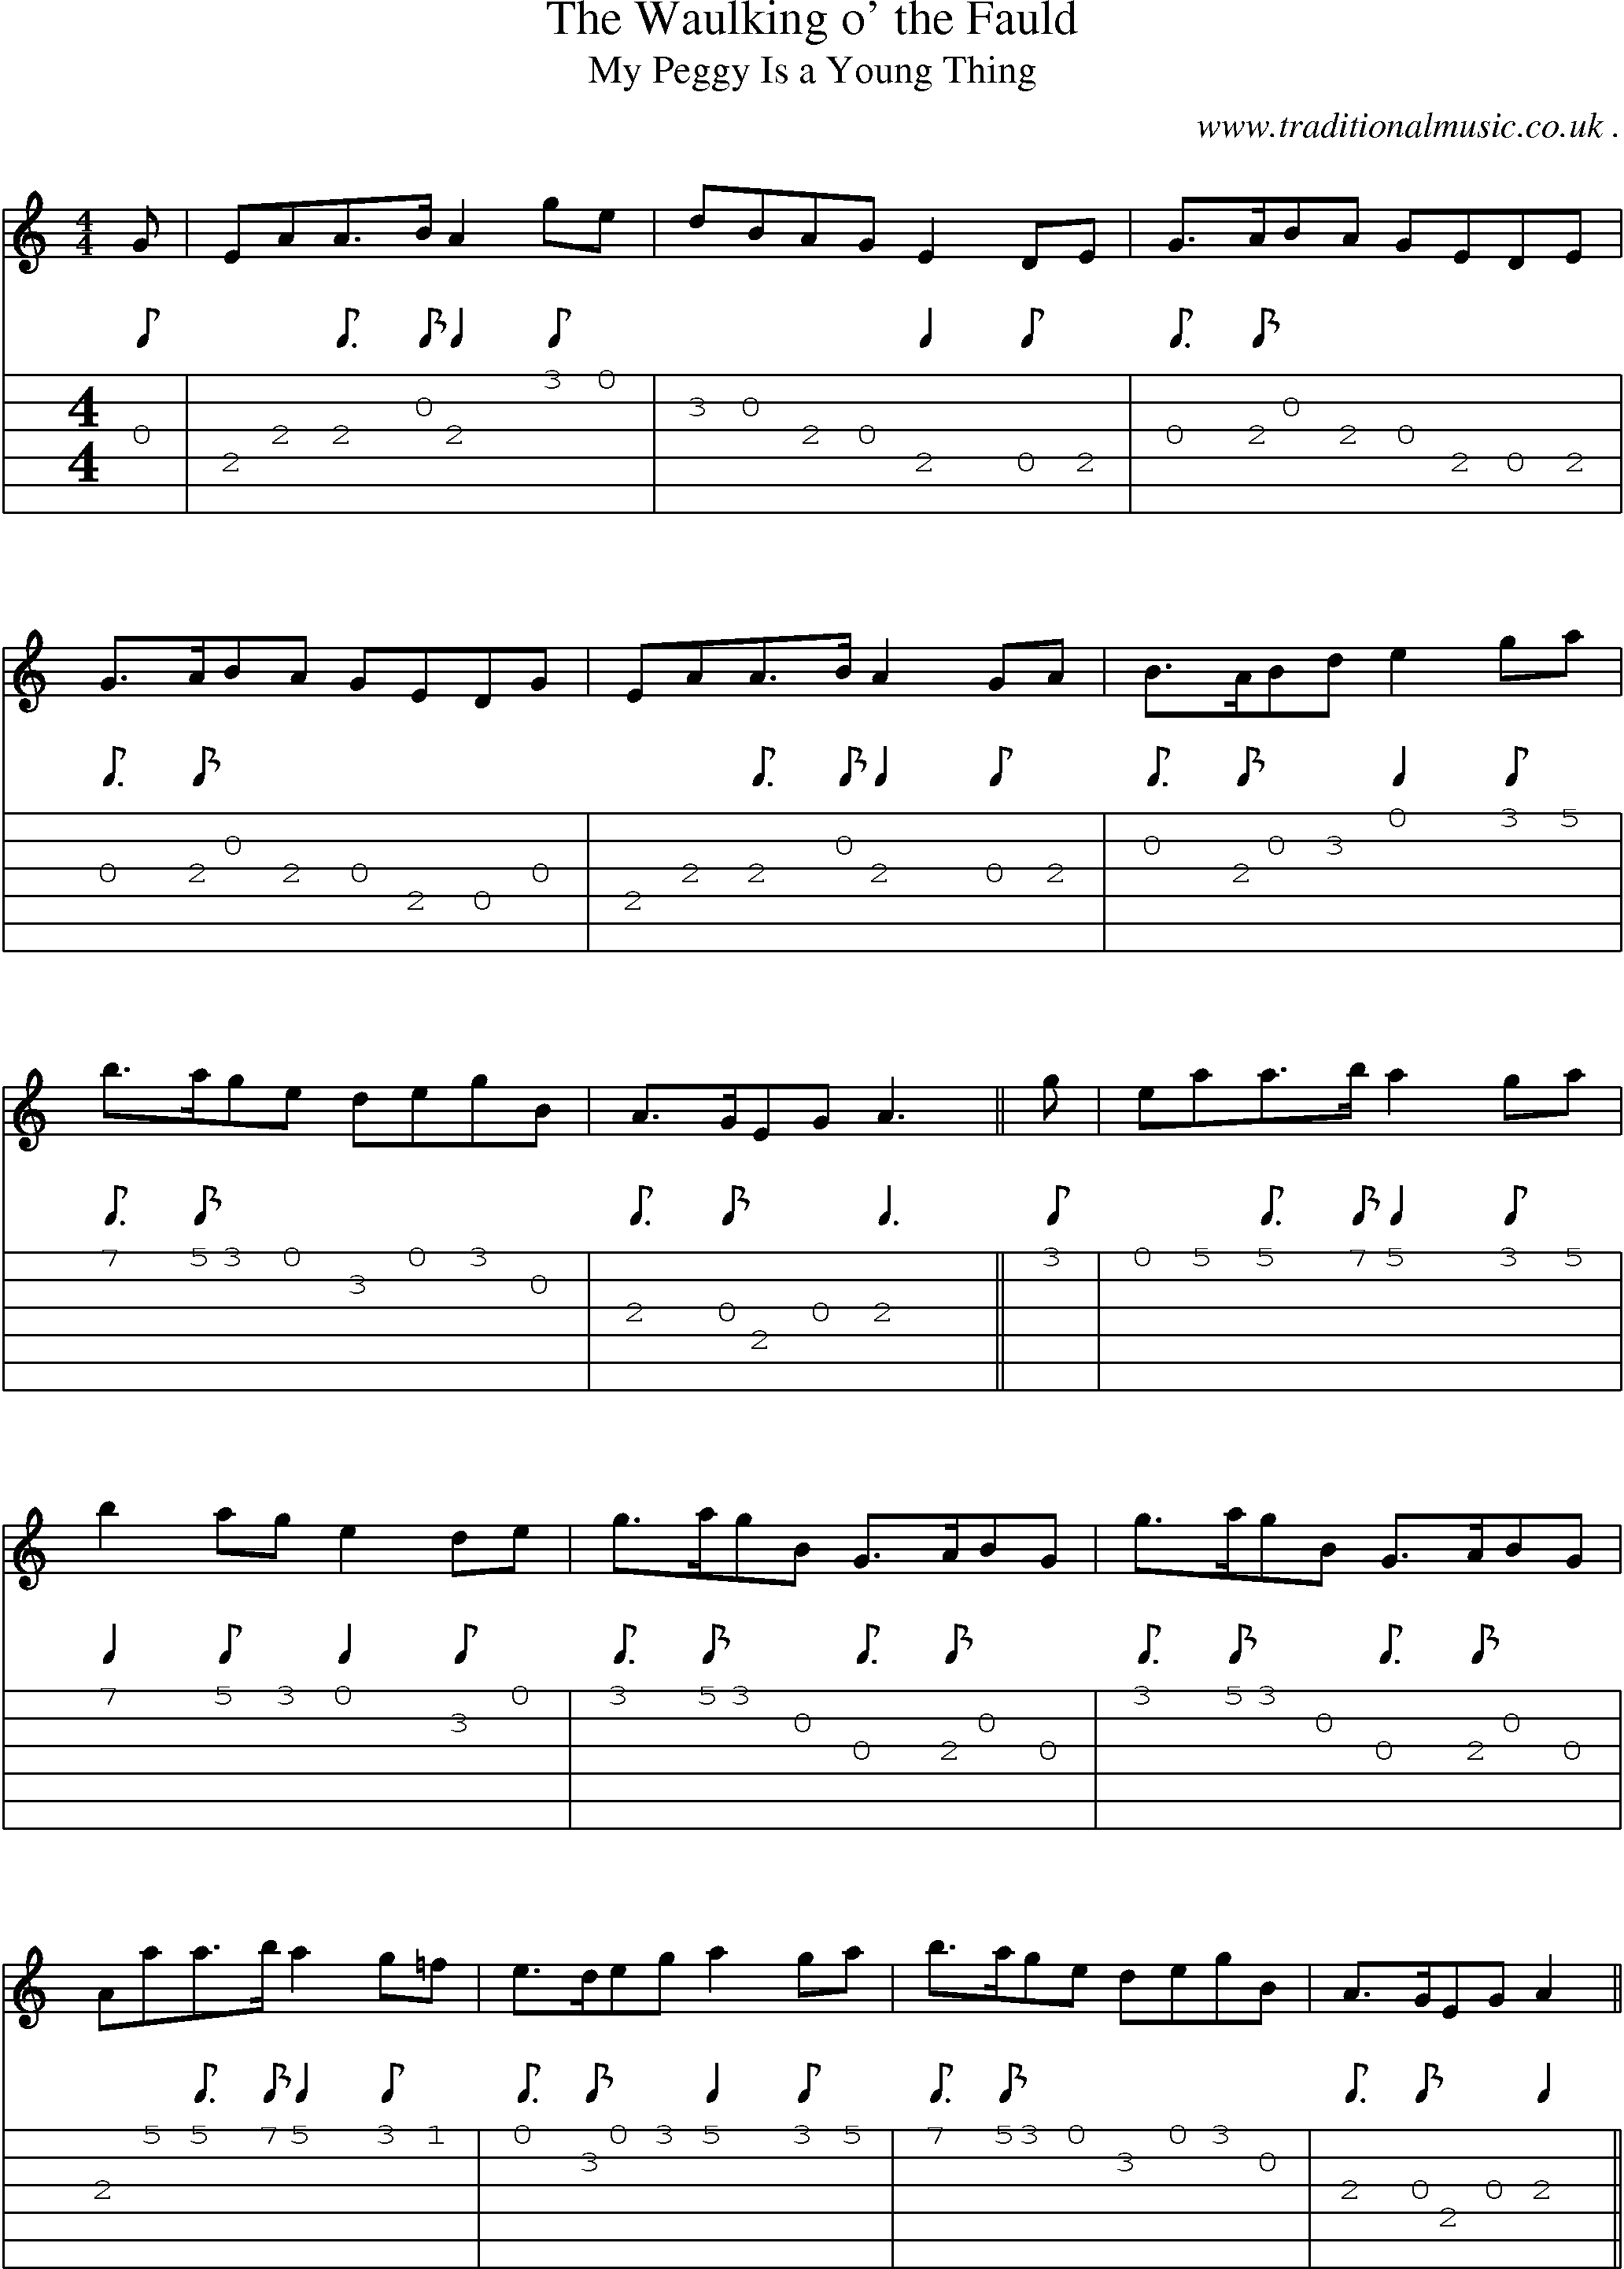 Sheet-Music and Guitar Tabs for The Waulking O The Fauld